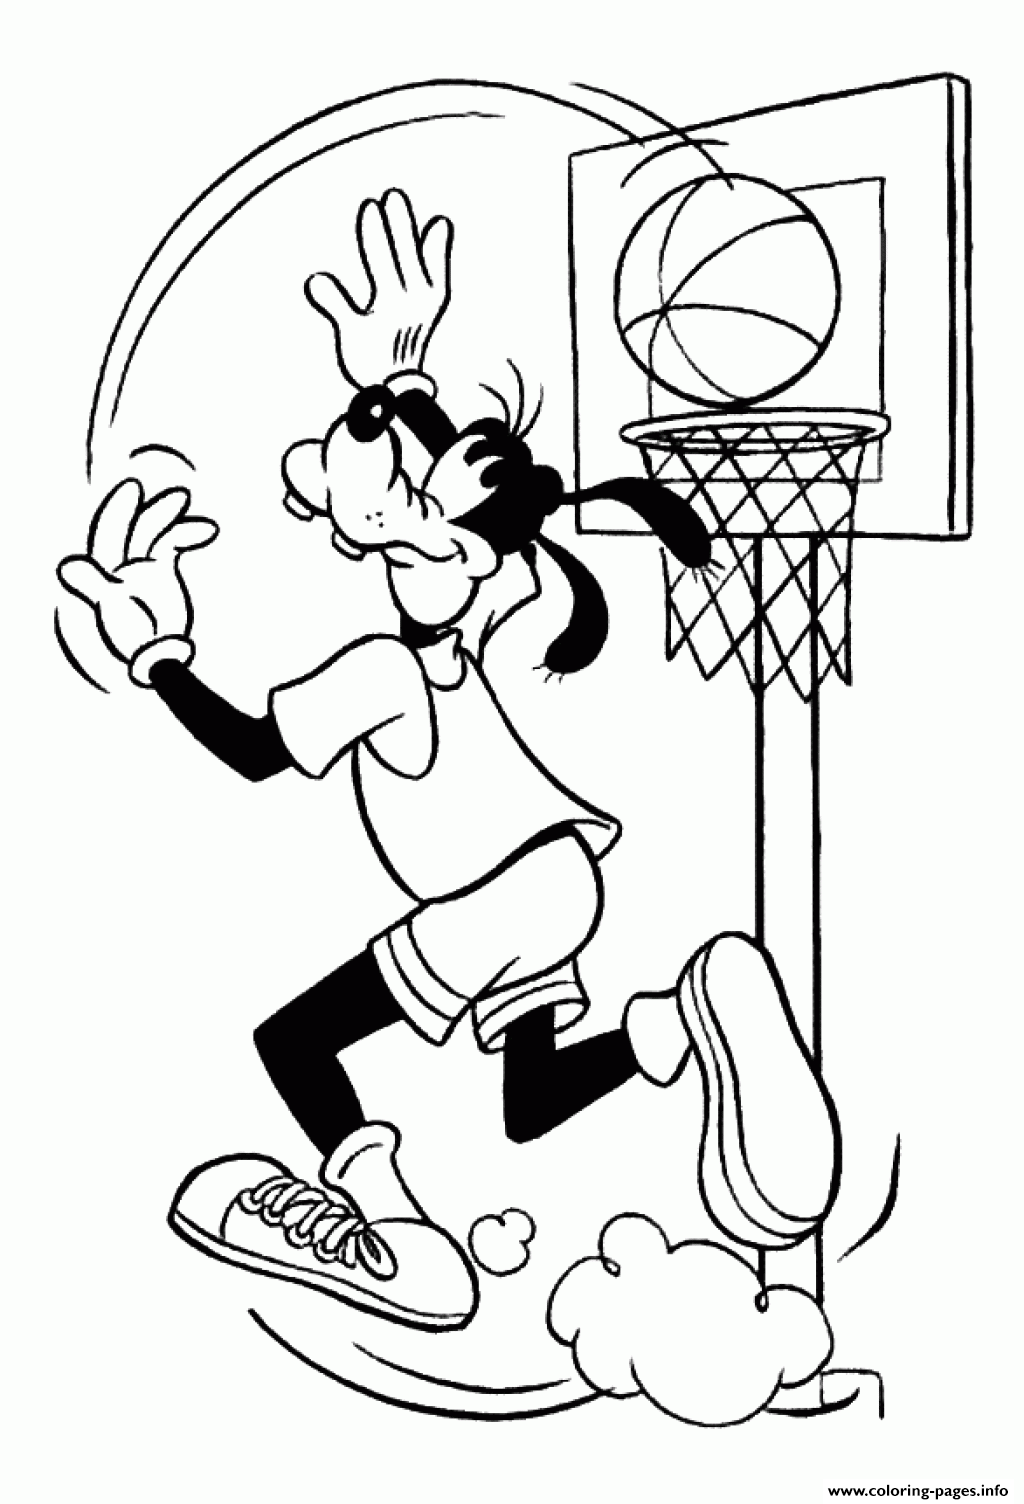 Disney Goofy Basketball E8b5 coloring pages